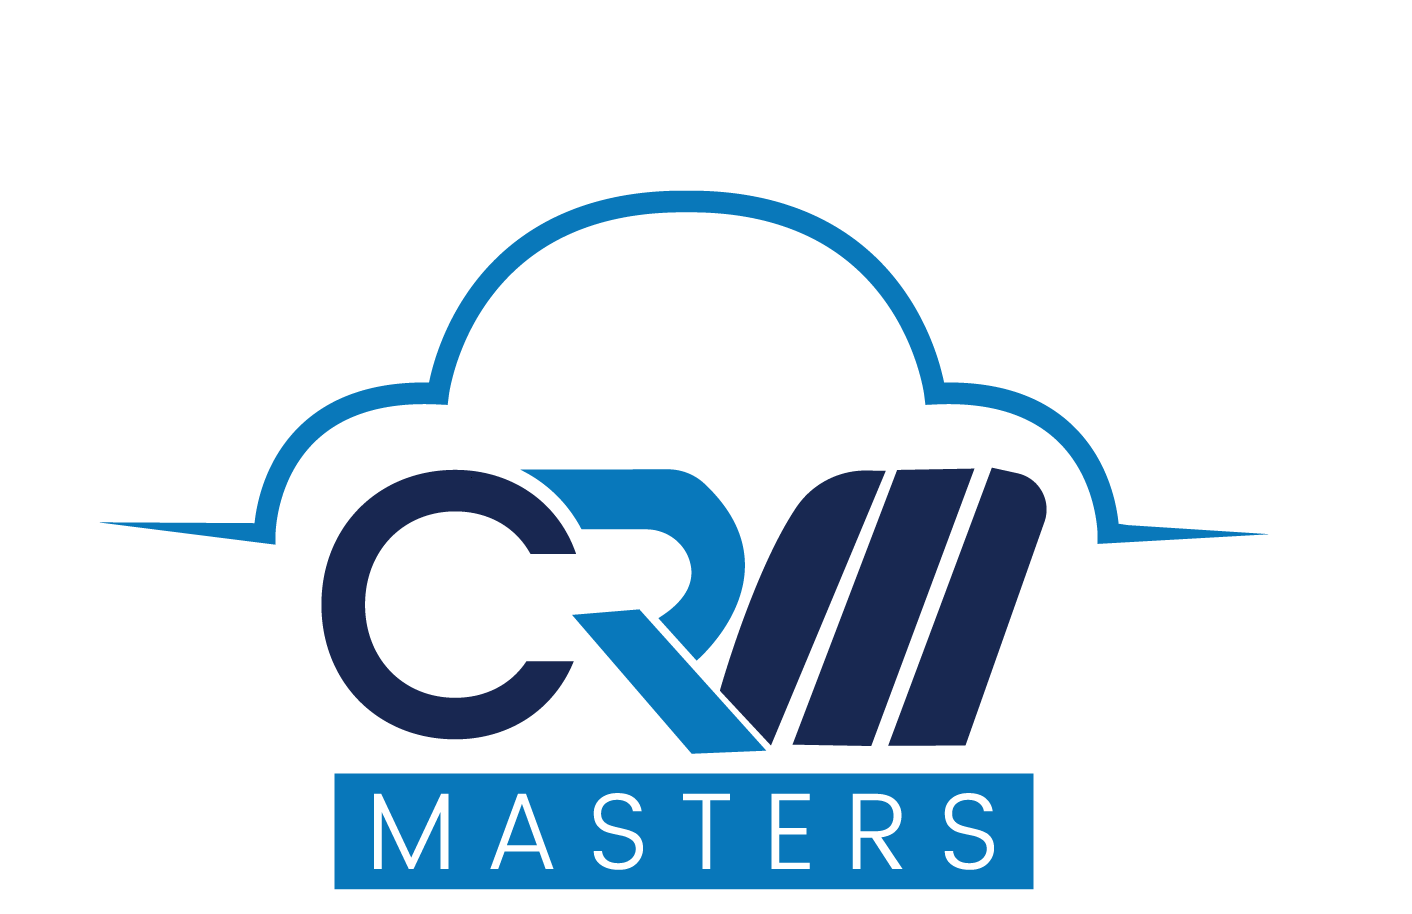 CRM MASTERS INFOTECH LLP